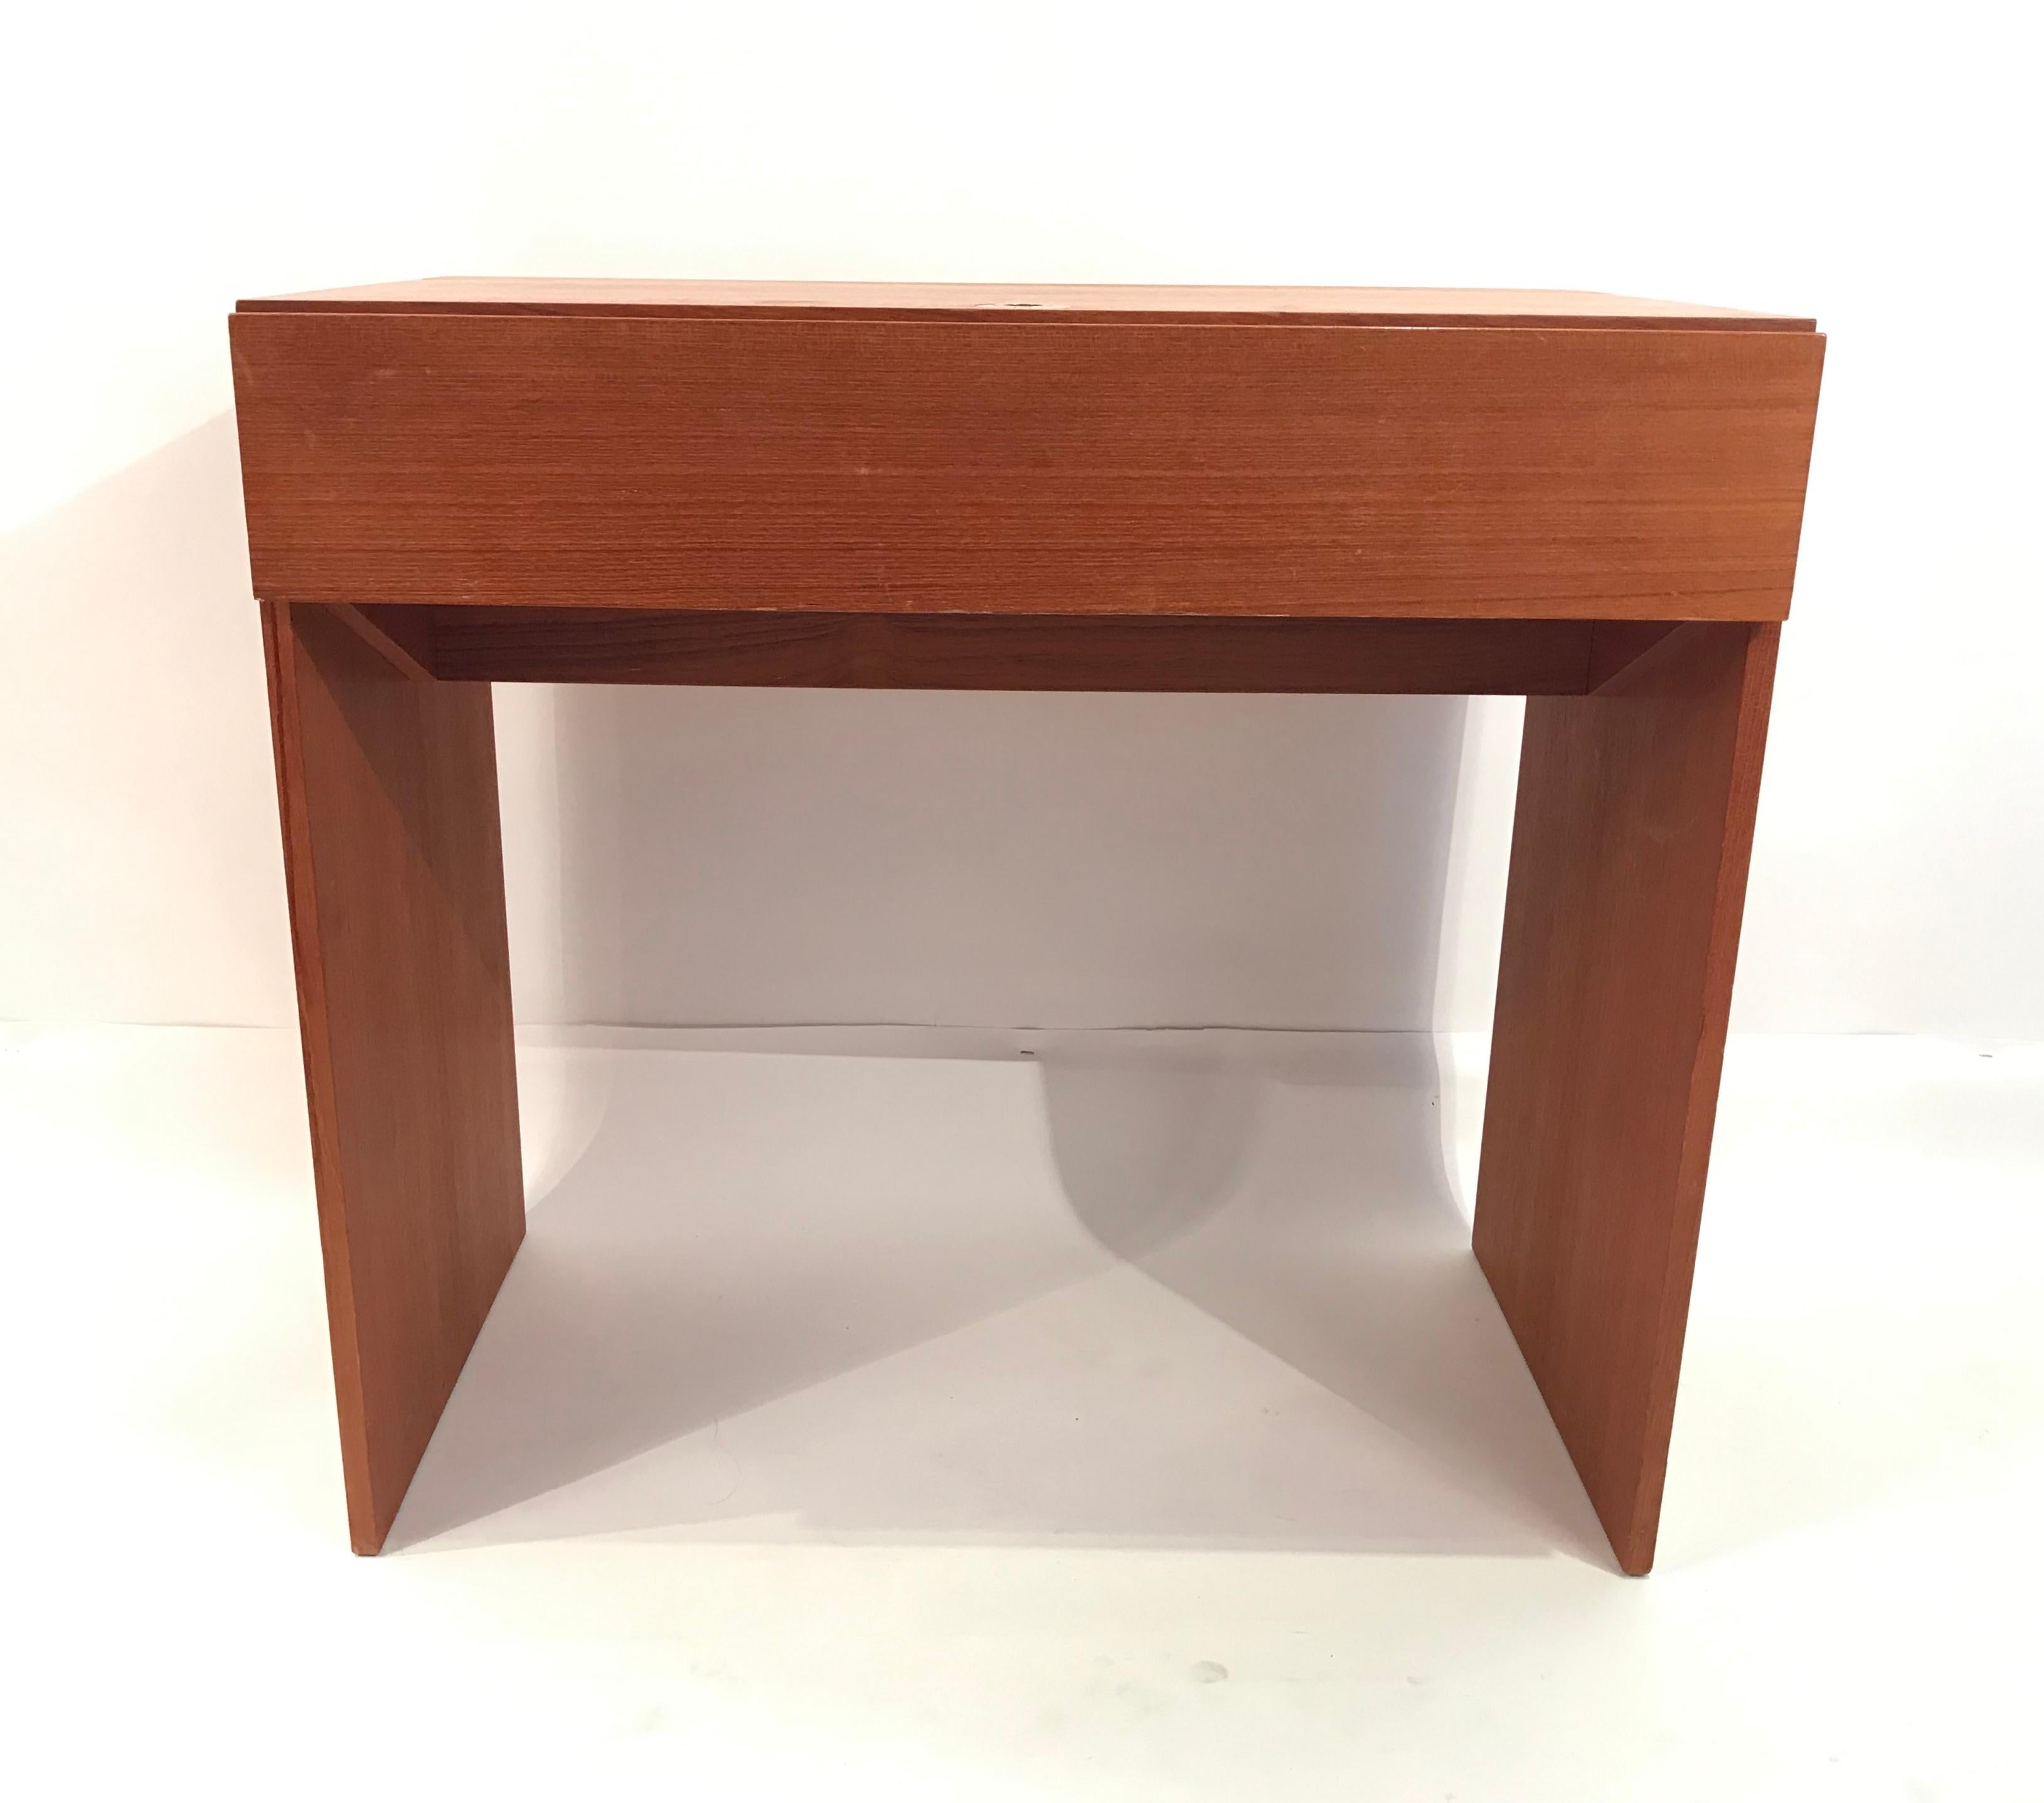 Stylish and compact teak desk with fold up vanity mirror. Interior has space for office storage or cosmetics. Designed by Arne Wahl Iversen and produced in Denmark by Vinde.